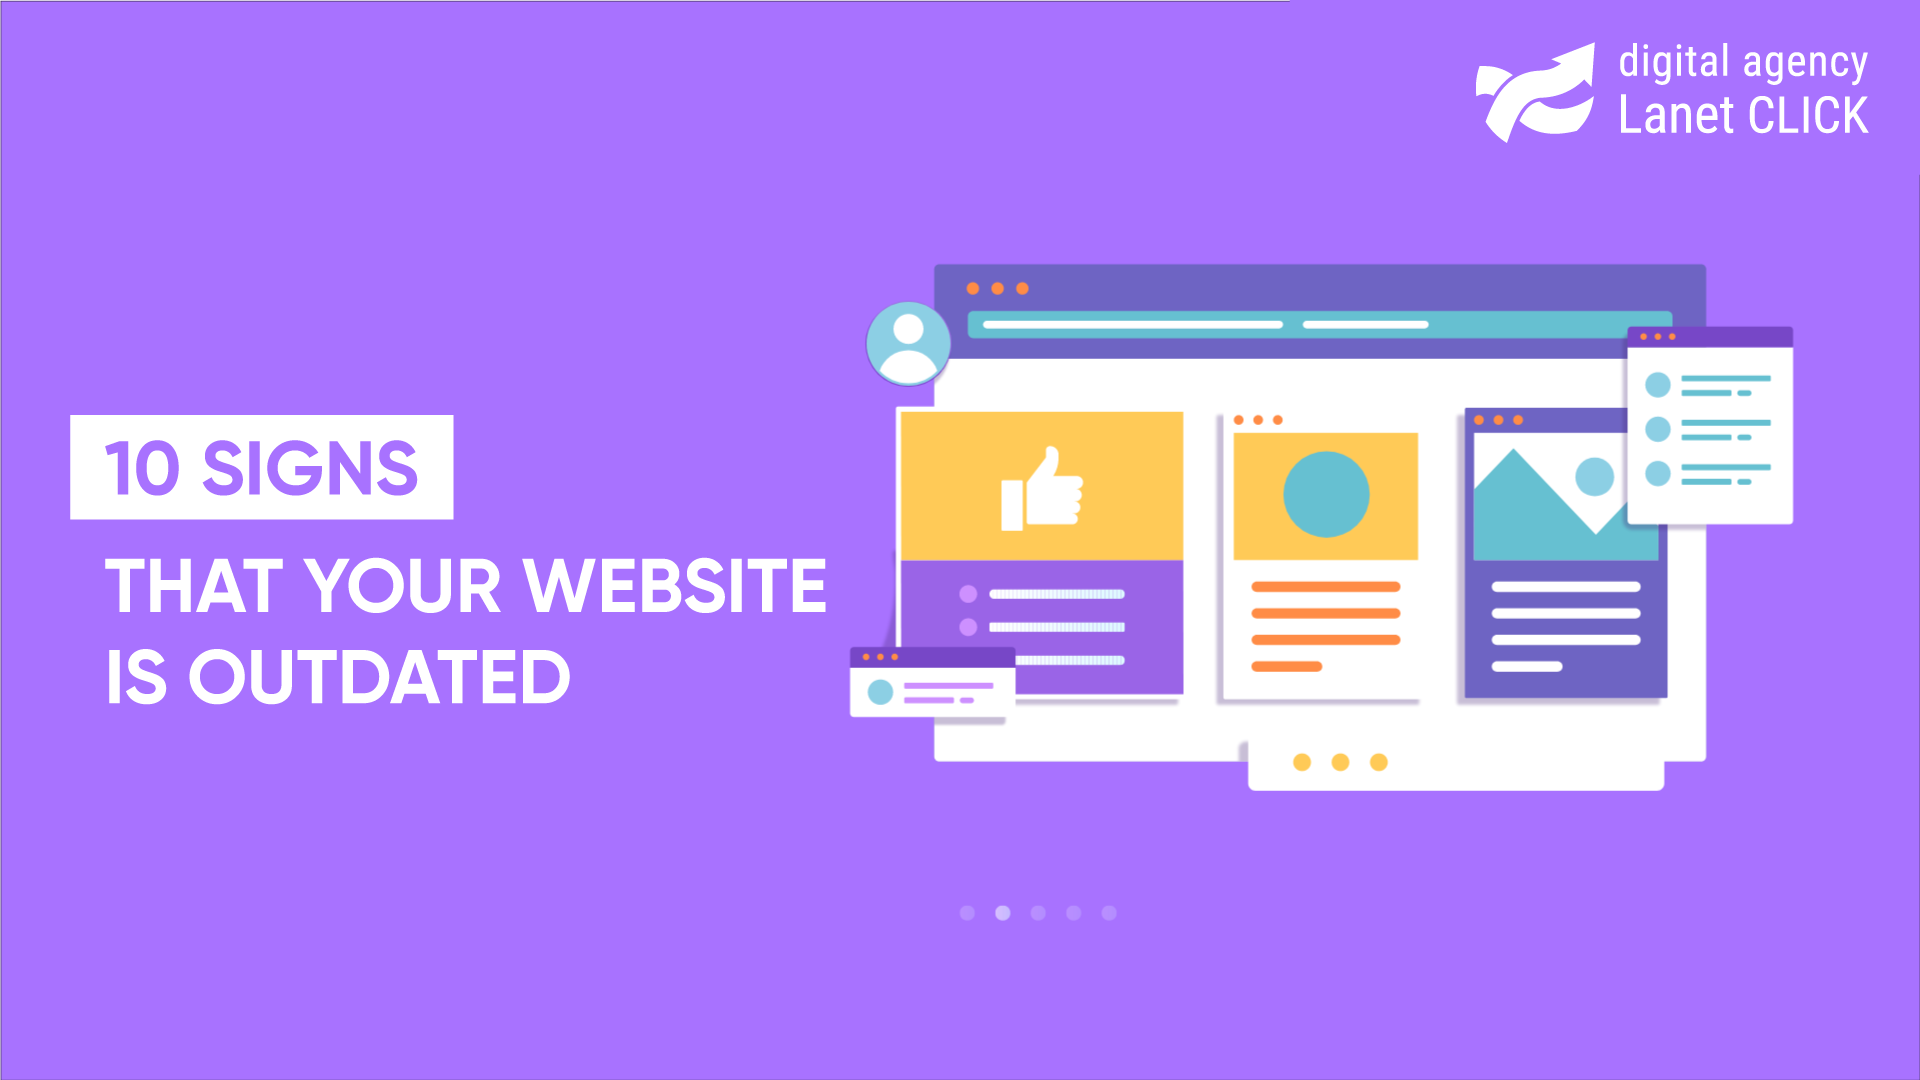 10 signs your website is outdated